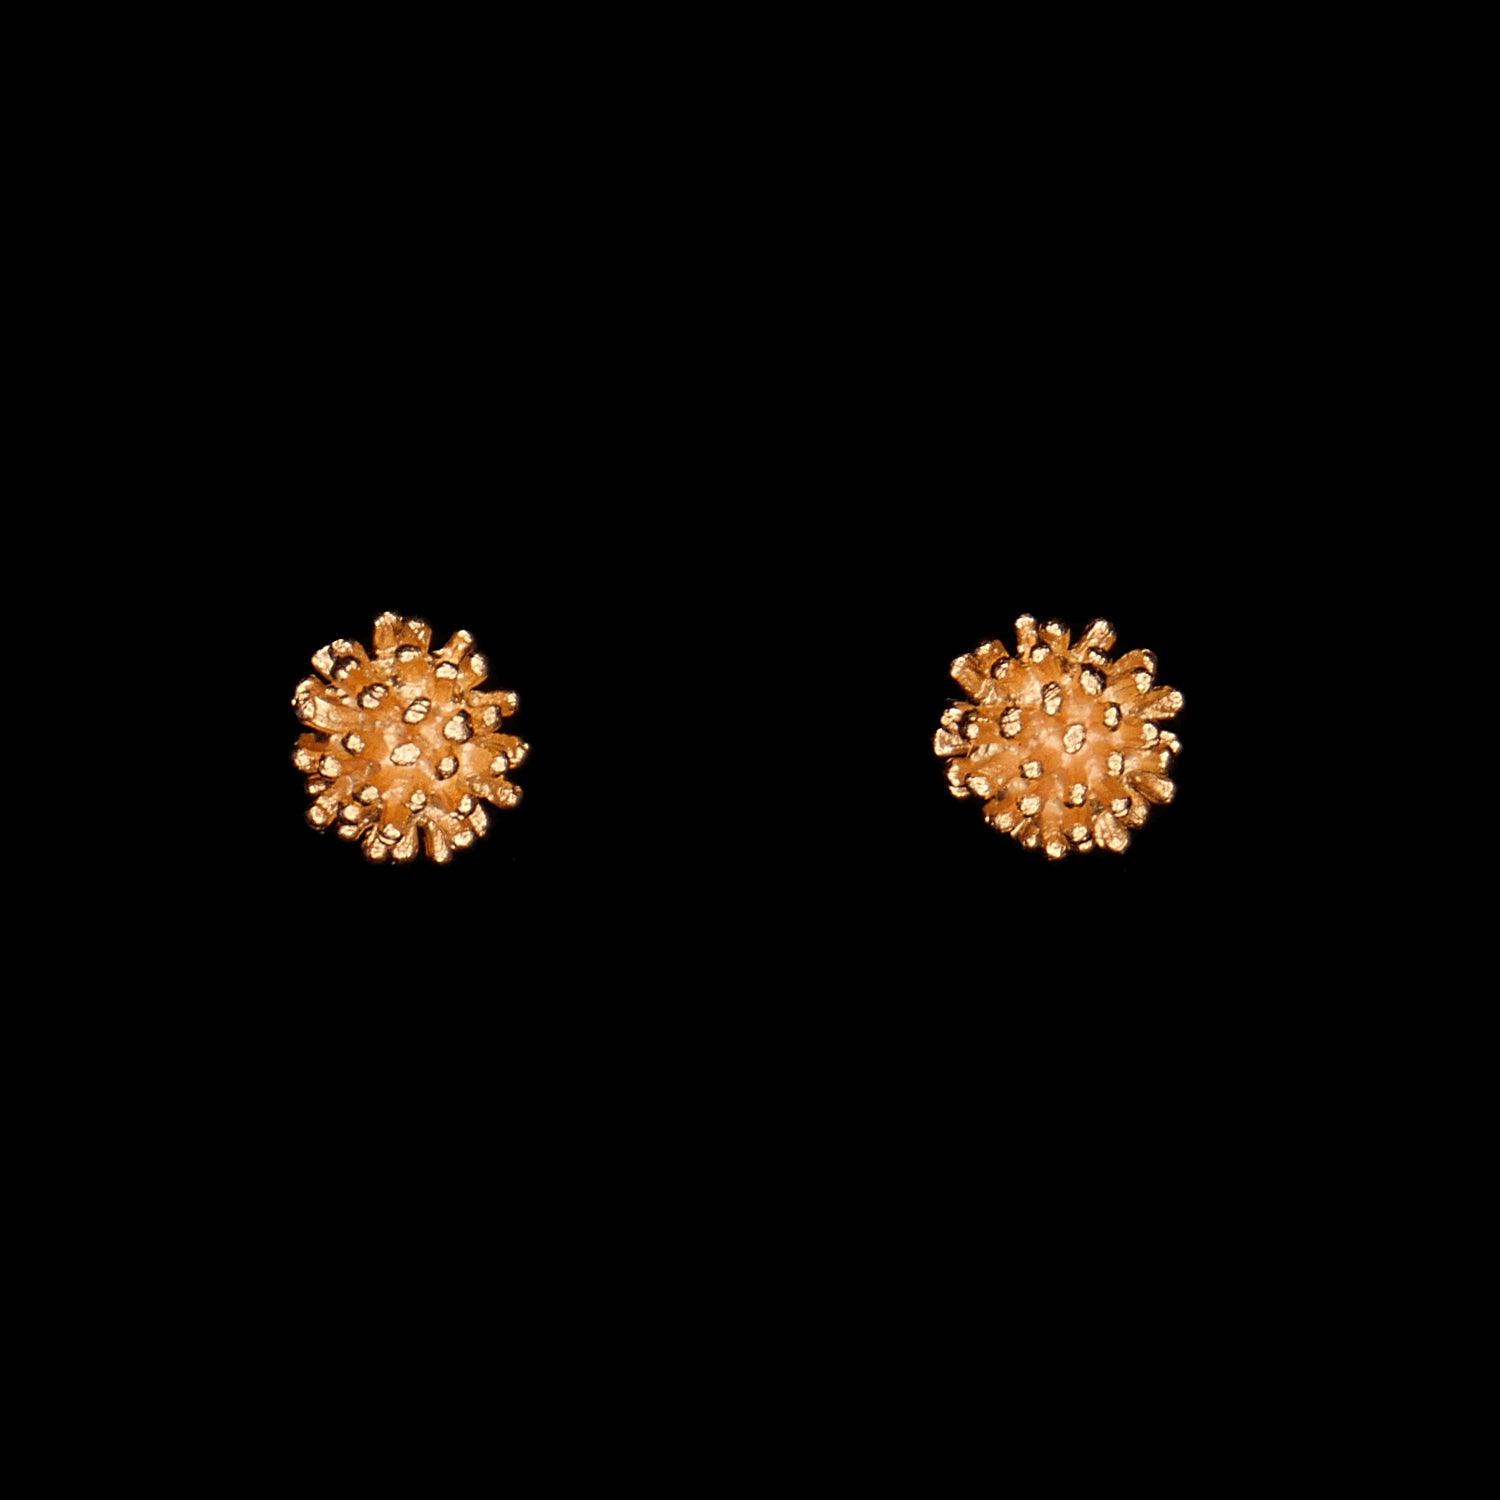 Gone To Seed Earrings - Small Stud Gold - Michael Michaud Jewellery